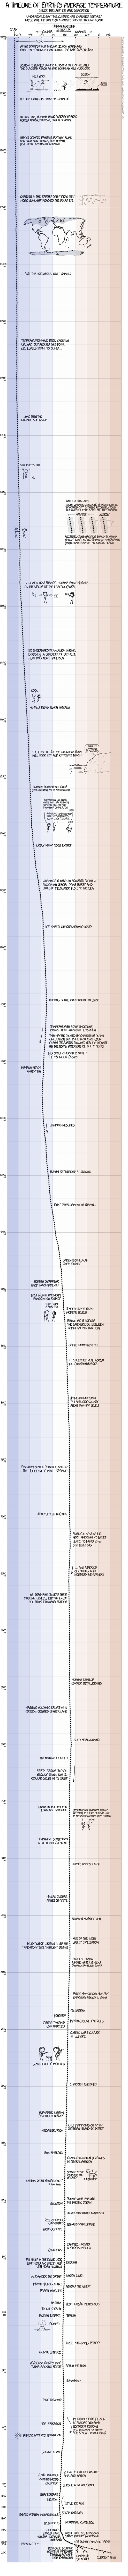 This is a very, very long graph with time on the Y axis and temperature on the X axis. The X axis goes from -5 degrees C to +5 degrees C. The Y axis goes from 22,000 years ago at the top, to the year 2200 at the bottom. At the beginning, Earth is in an ice age, with a mile of ice over Boston. There is a small illustration of how that sheet of ice would have towered more than five times the height of the tallest buildings in the city. The temperature line then continues downward - forwards in time - through the slow warming out of the ice age, into the dawn of civilization. It goes past early farming, cave paintings, and metalworking, the rise and fall of ancient empires, the extinction of species like the saber-toothed cat, and a selection of the many occurrences on our planet in the last 20,000 years. It passes the first known opening of the Northwest Passage due to melting sea ice around 2009. When it reaches the 20th century, there is a sharp increase in temperature, and into the 20th century the line splits off into three possibilities - the best-case scenario of almost no more warming with incredible levels of action starting immediately, the optimistic scenario with two degrees C rise in temperature by 2100, and the path we are currently on, with the increase in temperature passing 4 degrees Celsius above the 20th century average by the year 2100. 